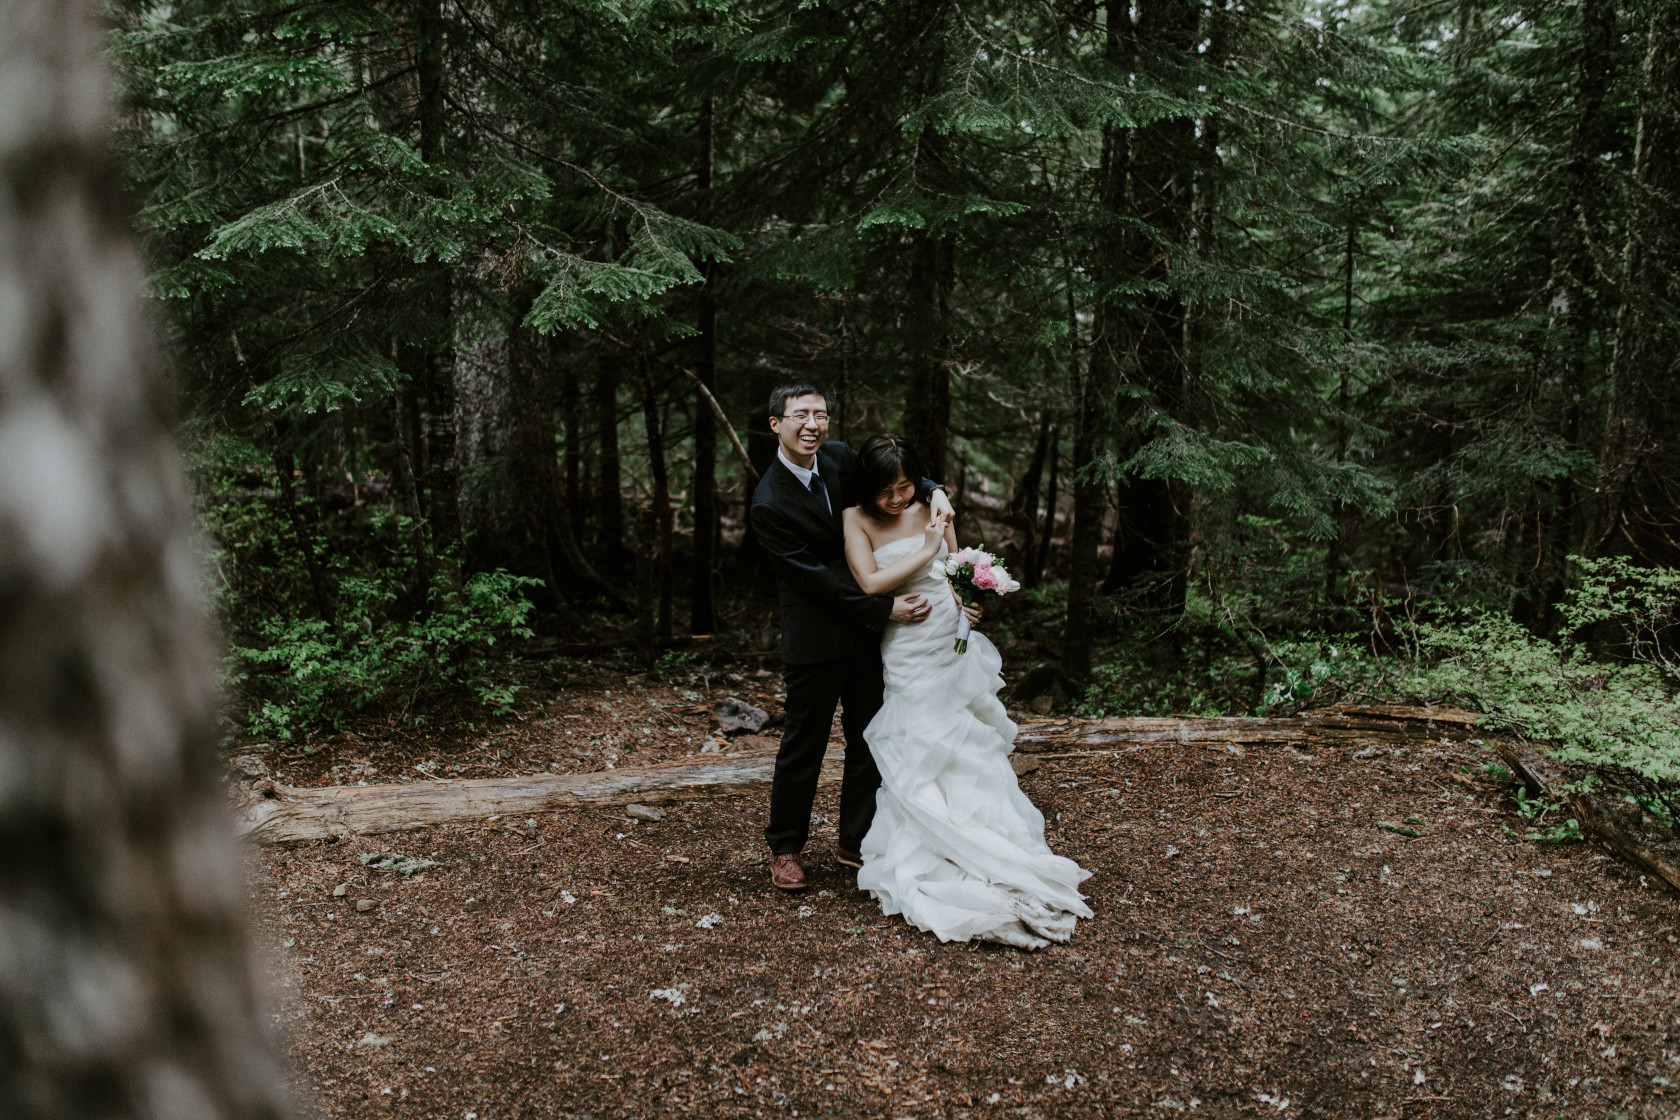 Alex holds Valerie along the trail. Elopement wedding photography at Mount Hood by Sienna Plus Josh.